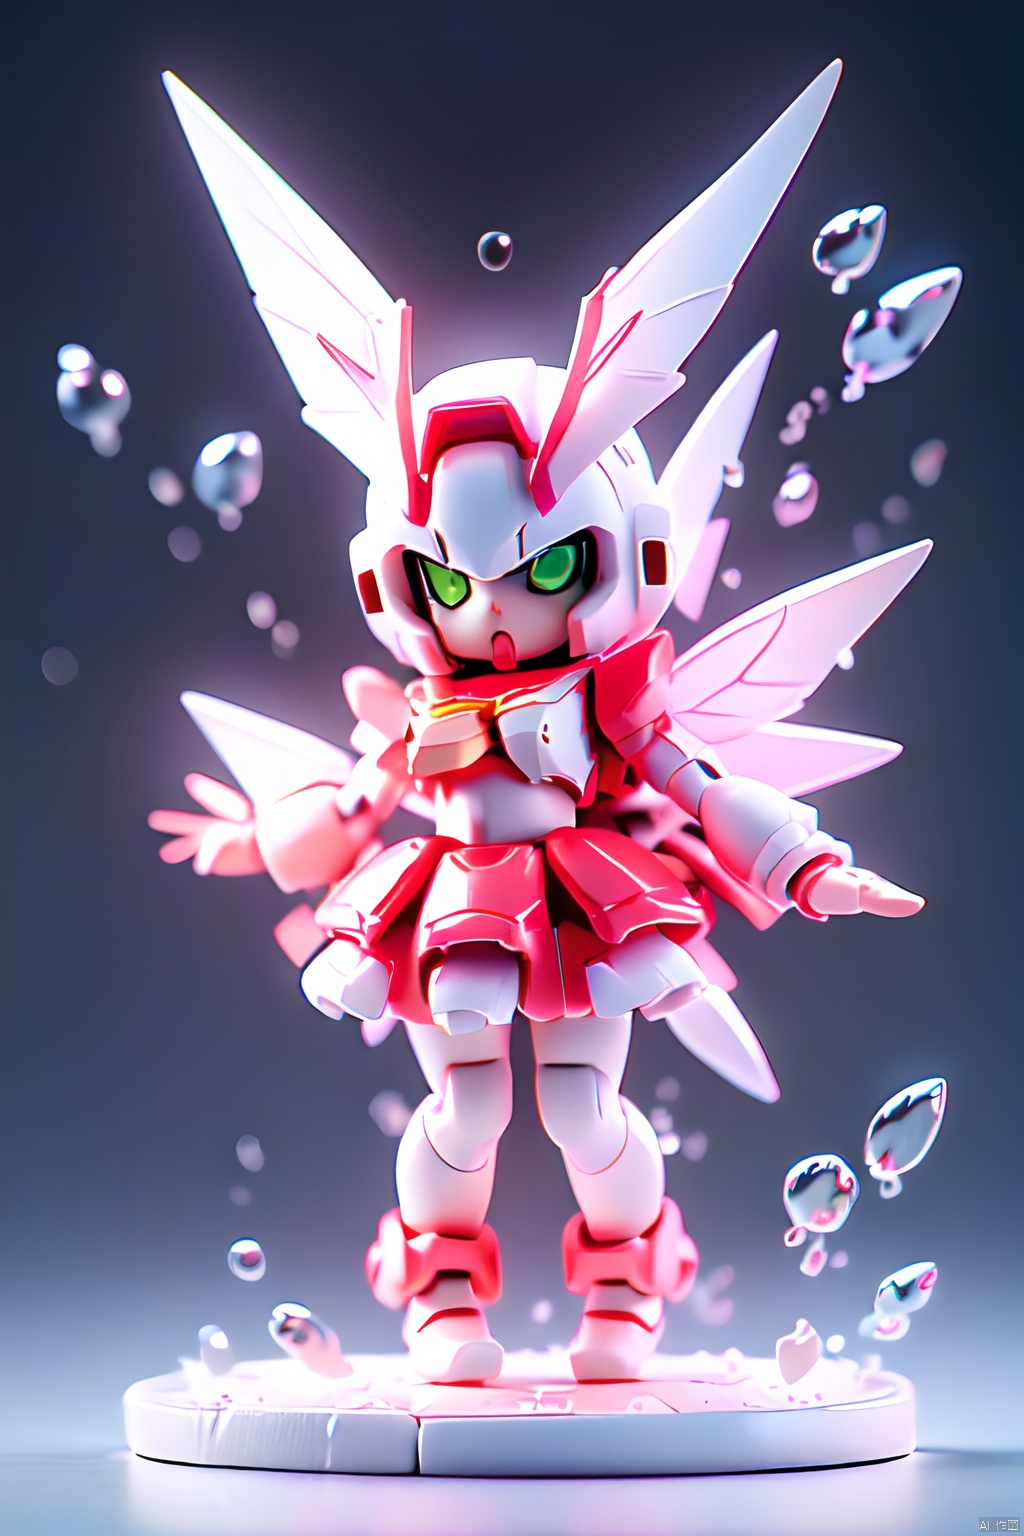 gdsj,mecha,no humans,robot,v-fin,green eyes,solo,glowing,mobile suit,glowing eyes,letterboxed,science fiction,looking at viewer,wings,clenched hands,bubble,(Full body photo),1 Transparent cute fairy,Fantasy glow,clean,white background,(Raytracing, HDR, Reasonable design, High detail, Masterpiece, Best quality, Ultra HD),light pink skirt,dull polish,3D render,